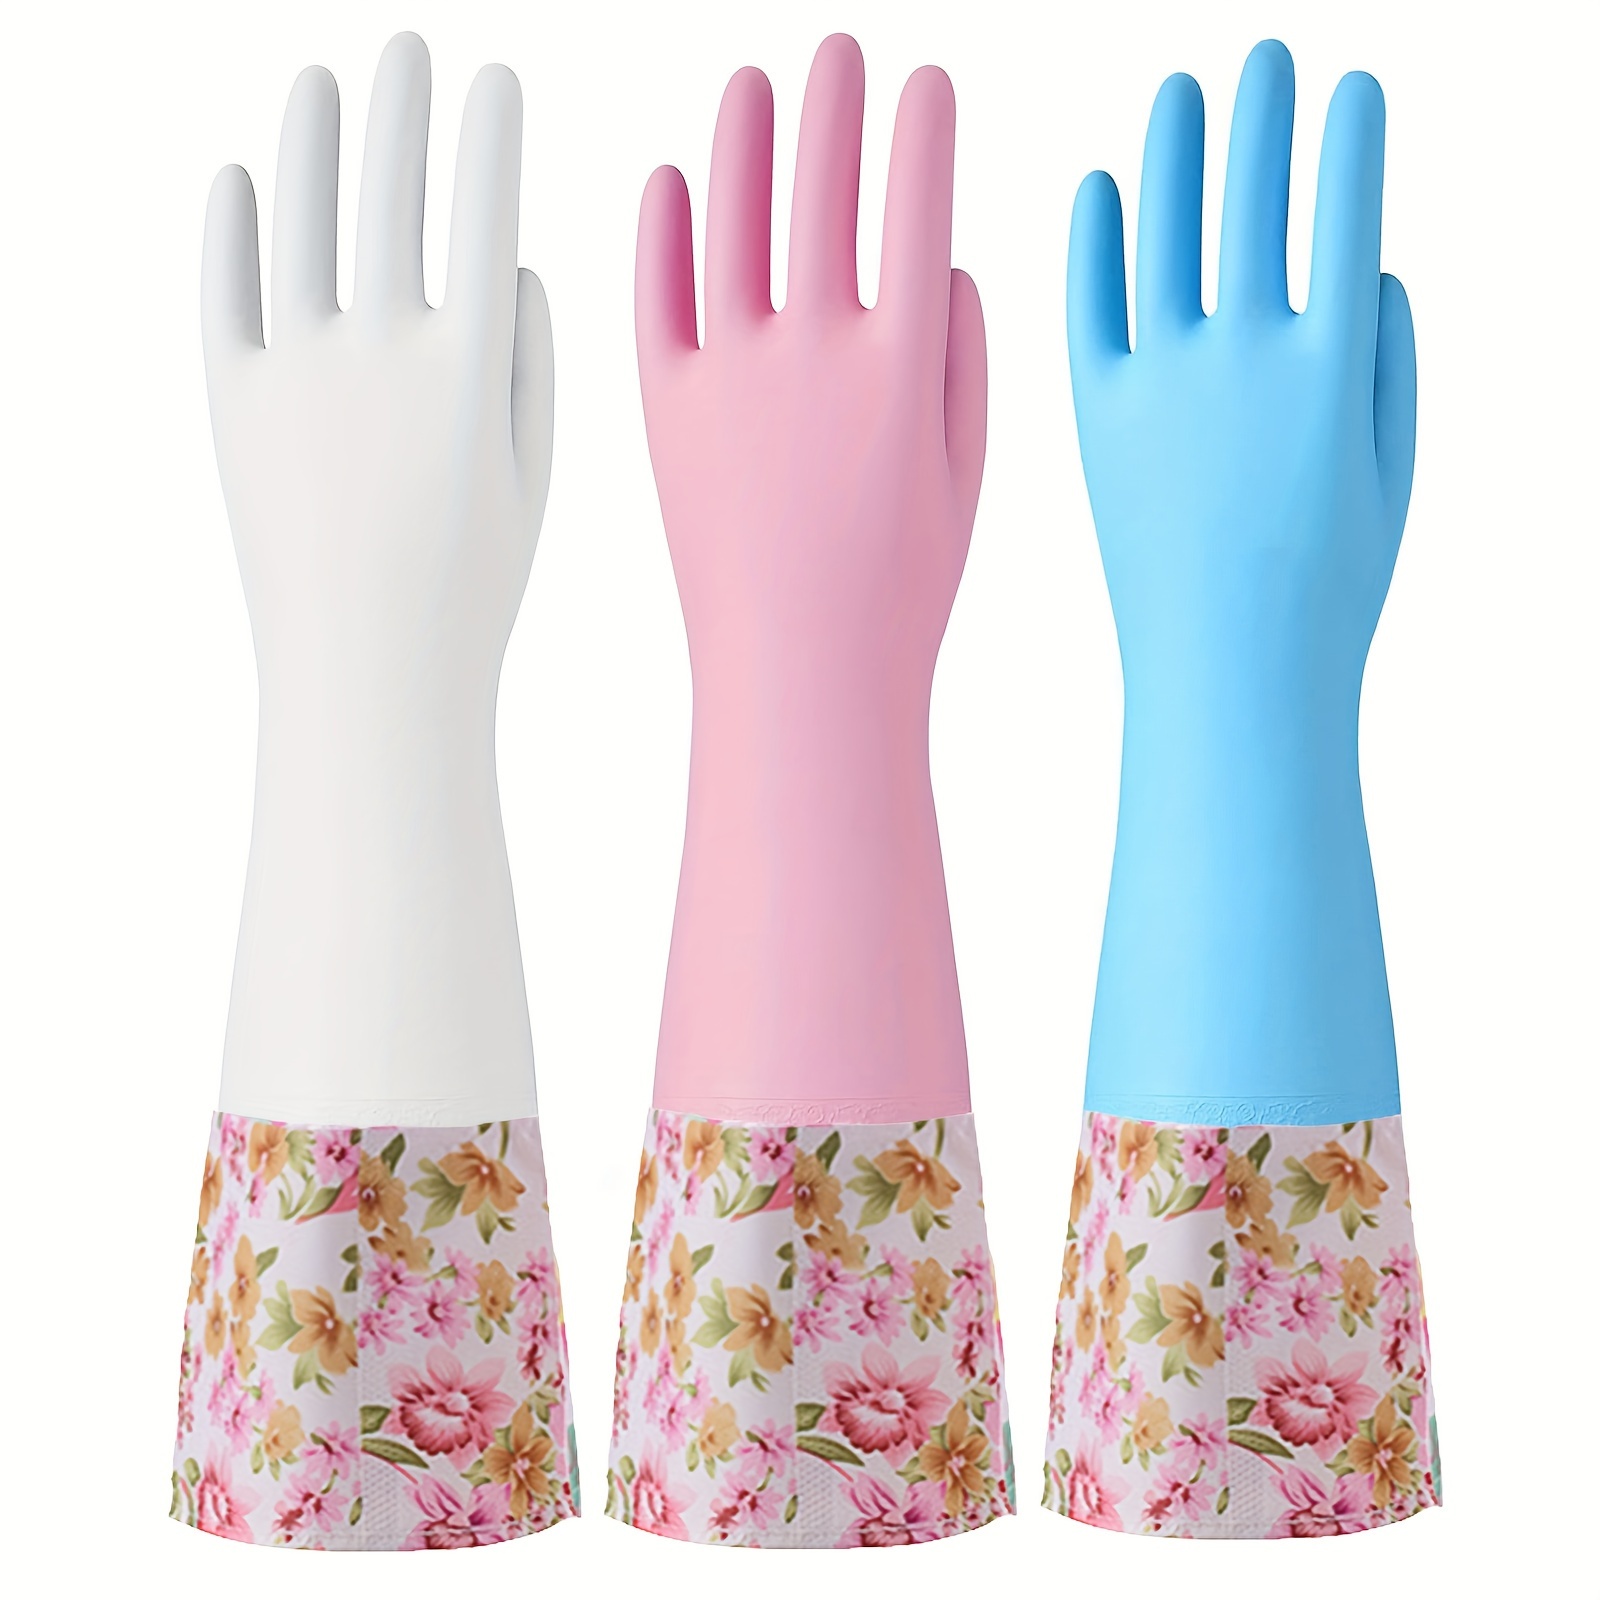 

3 Pairs, Premium Household Cleaning Gloves, Dish Gloves, Long Cuff, Waterproof Kitchen Dishwashing Gloves, Non-slip Housework Gloves, Durable Laundry Washing Gloves, Cleaning Supplies, Cleaning Tool